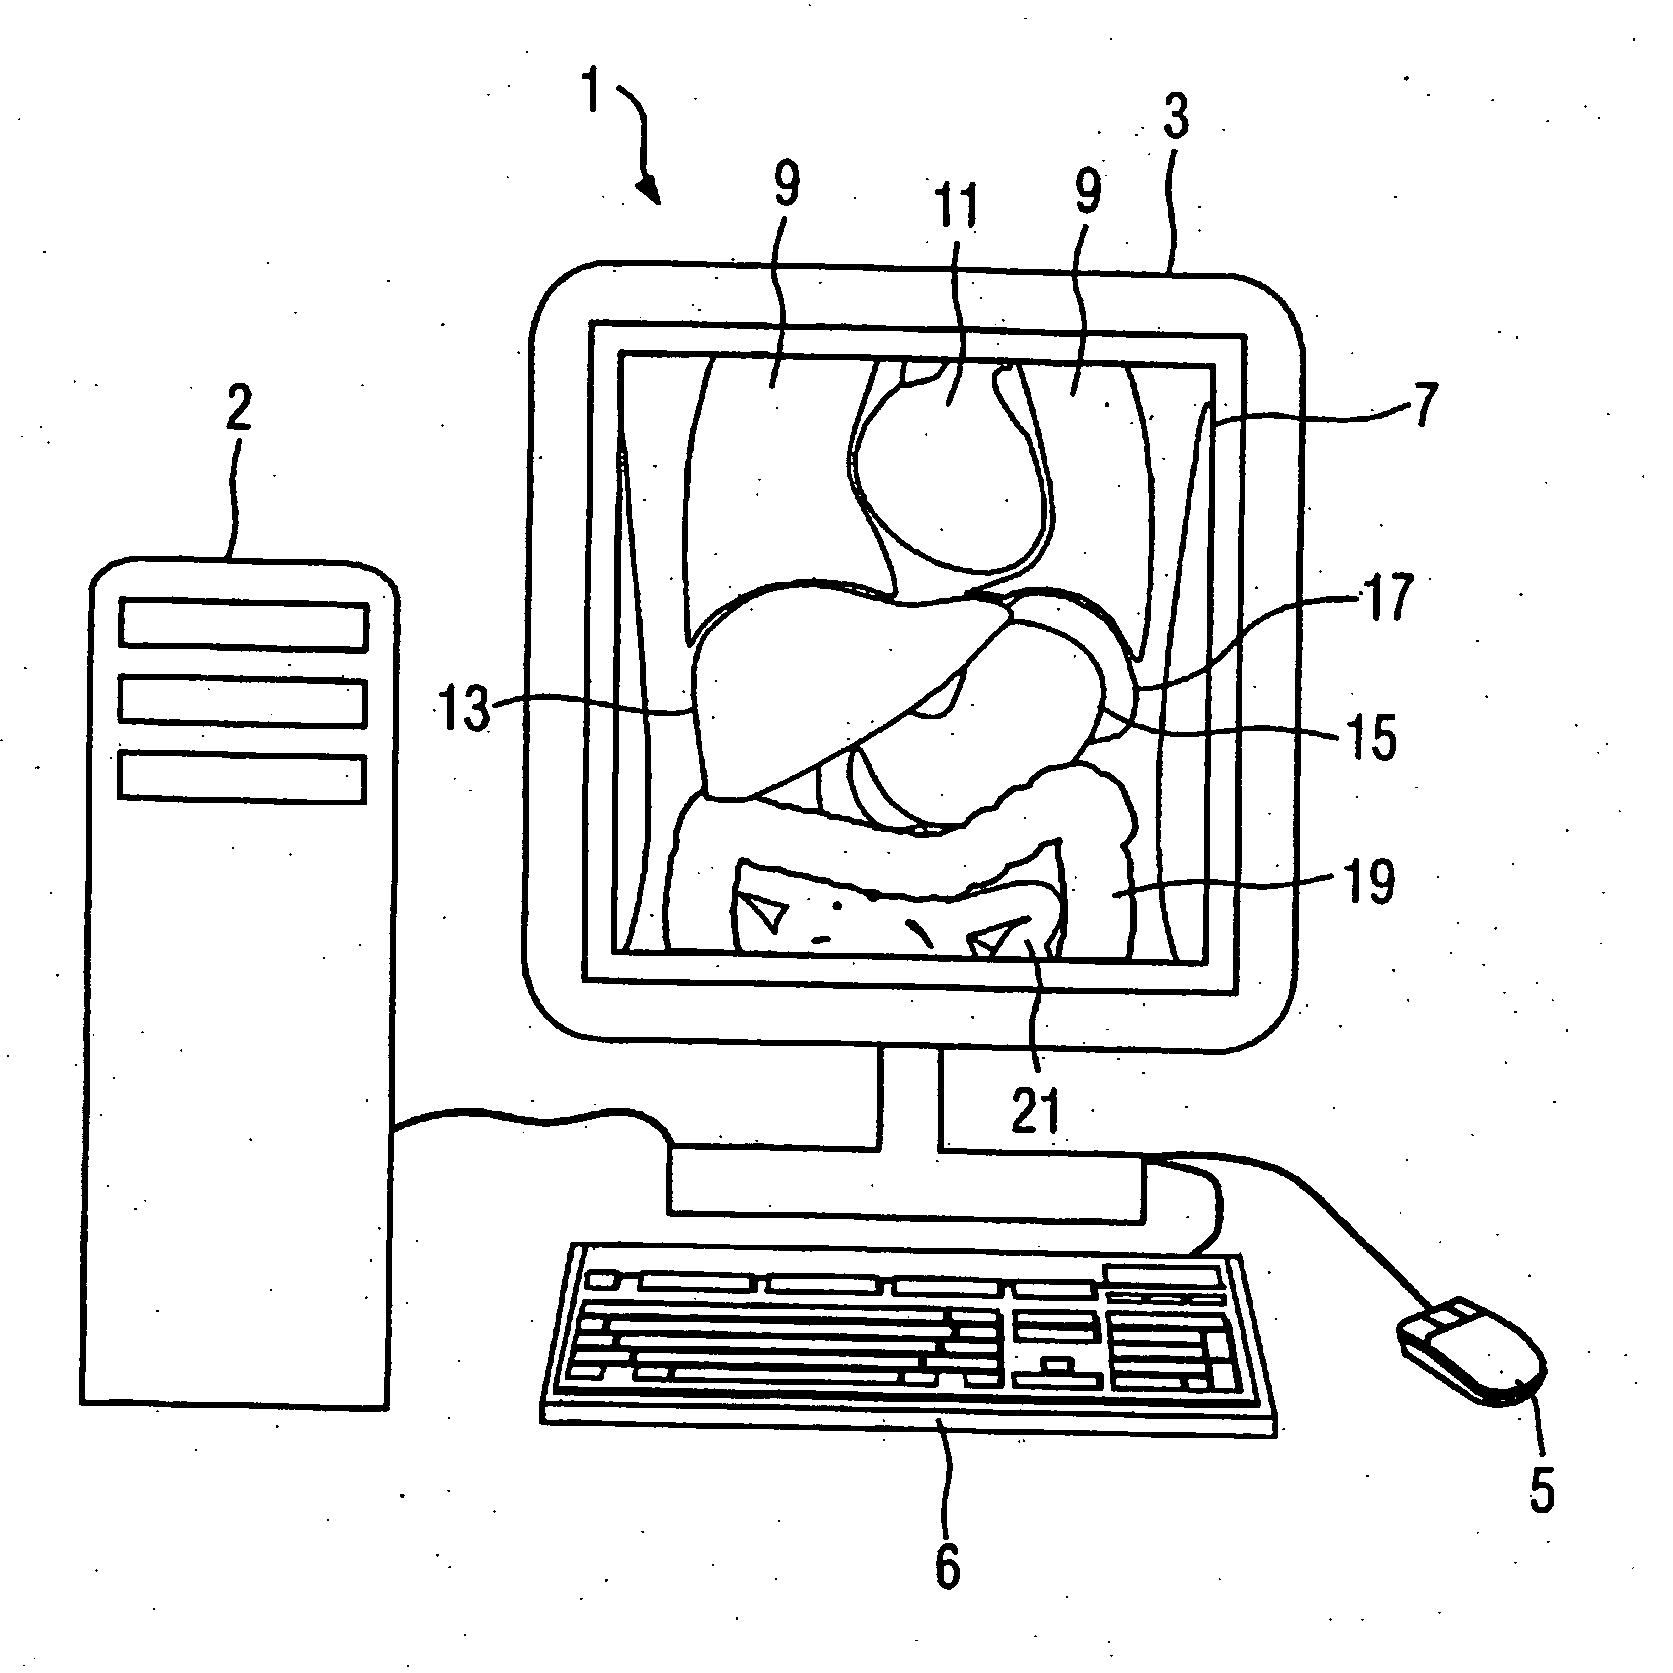 Method and processor for generating a medical image